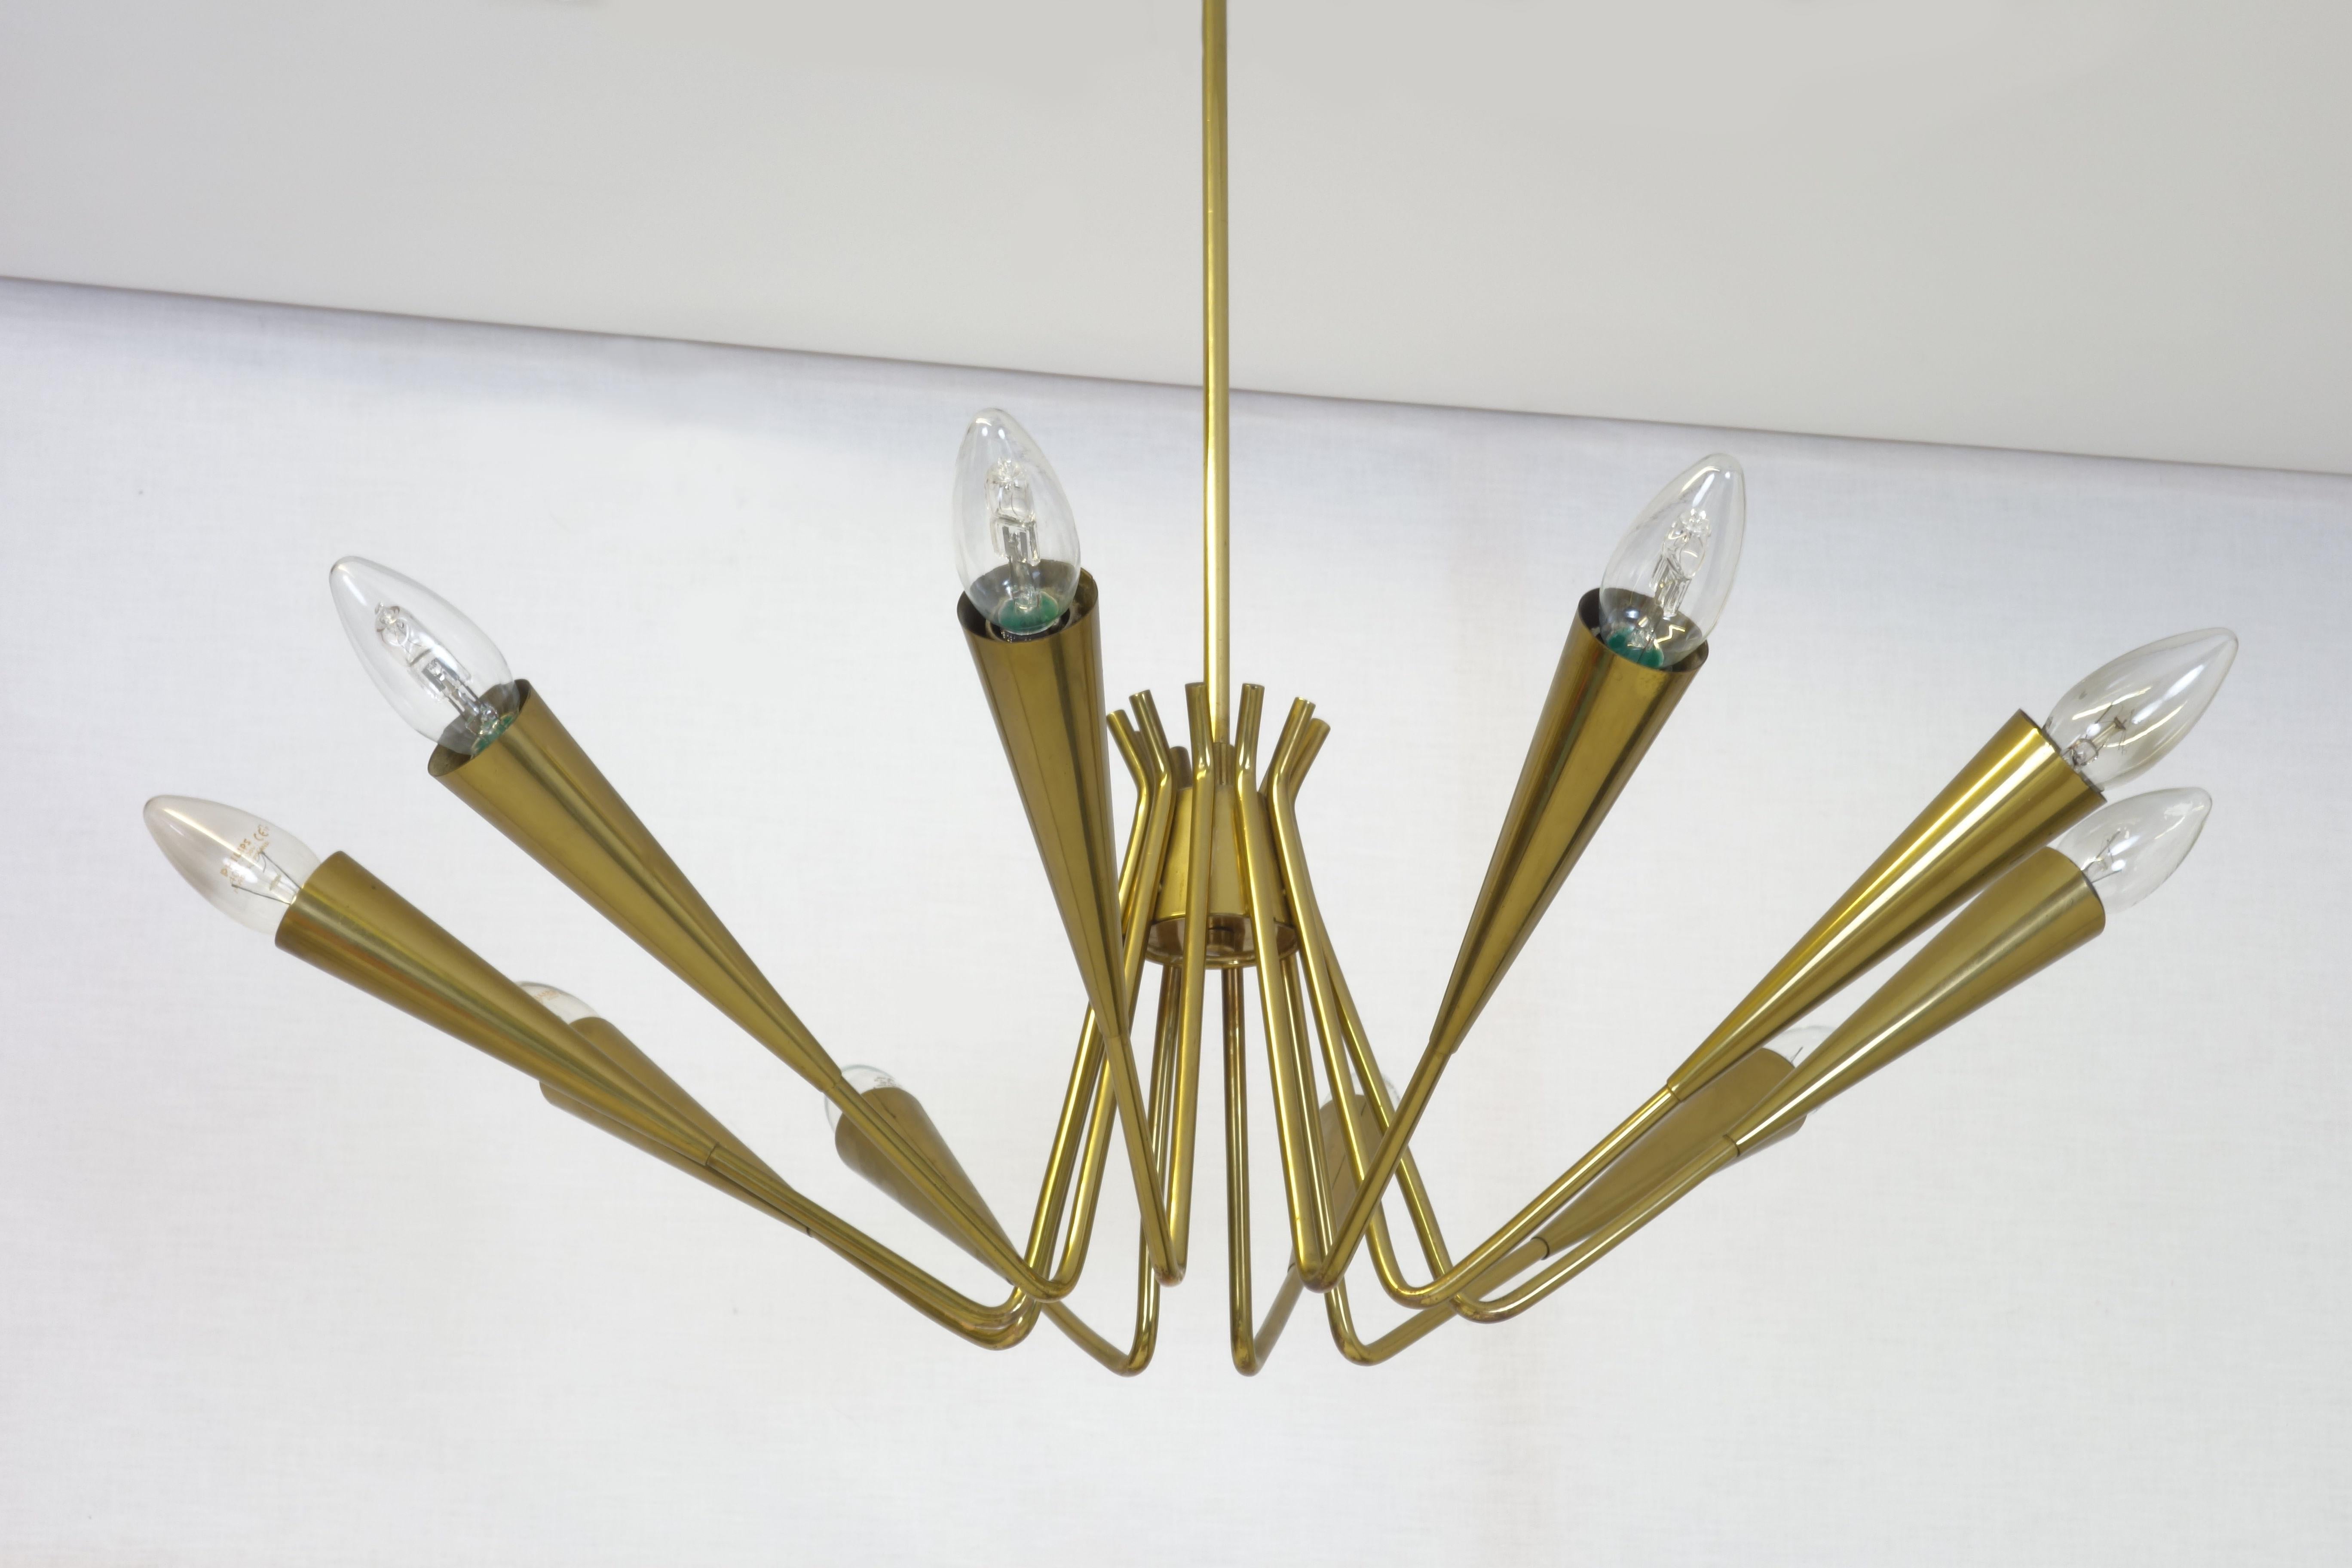 Large chandelier brass in the manner of Design Stilnovo Italy 1950s This object is equipped with 10 bulbs designed in the typical manner of the beginning Space Age. An eccentrically shaped piece doubtlessly ahead of its time.